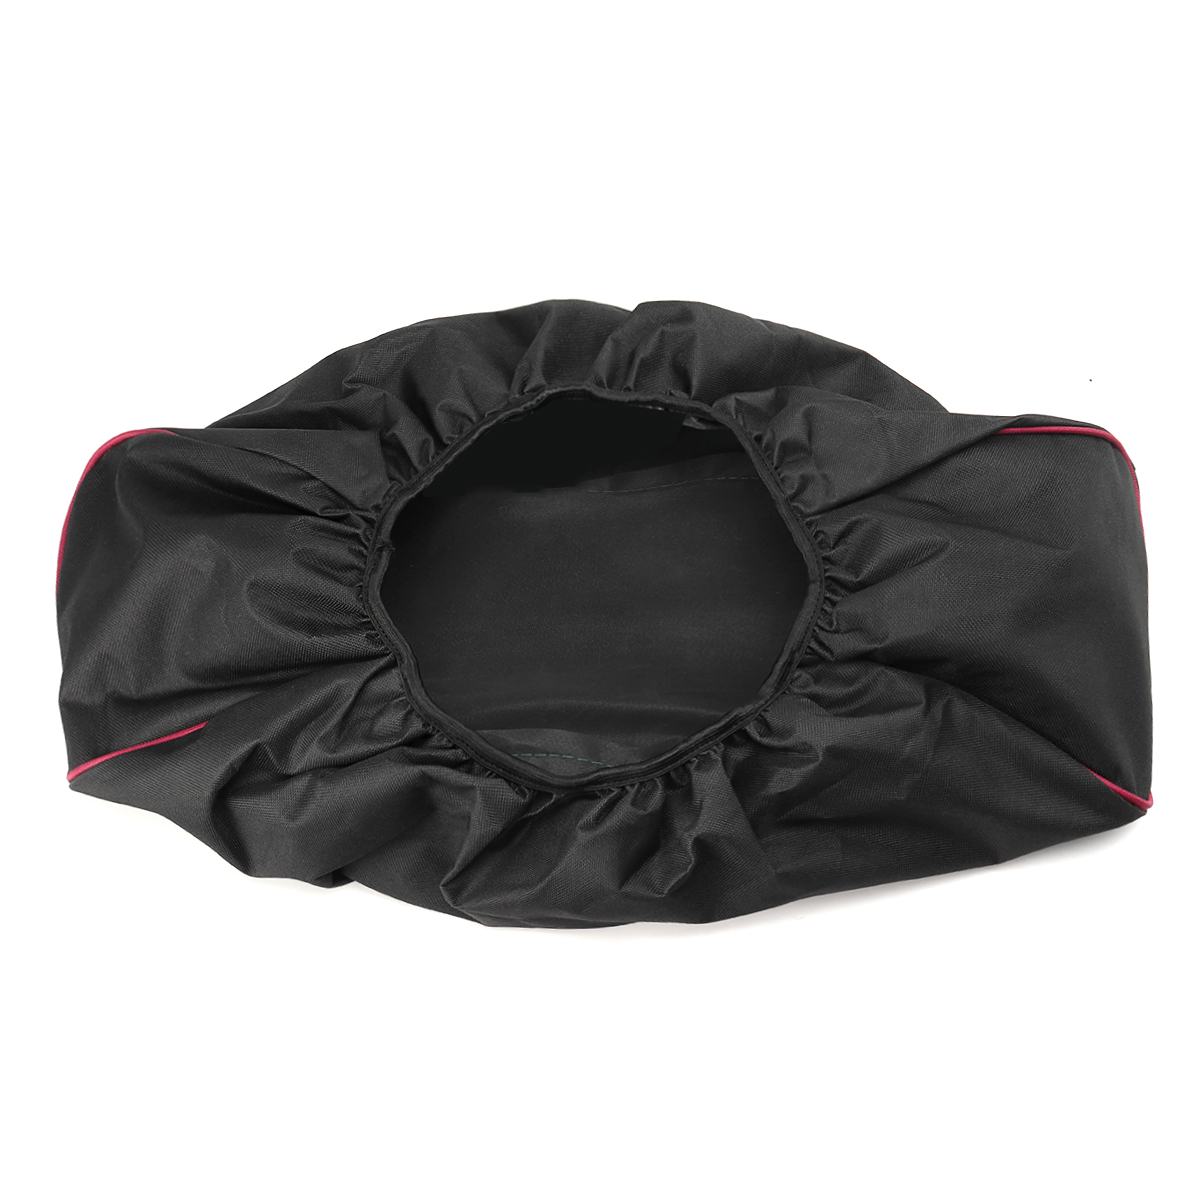 Black Waterproof Soft Winch Cover Mildew-resistant UV Car Covers 600D Oxford Cloth Driver Recovery 56x24x18cm